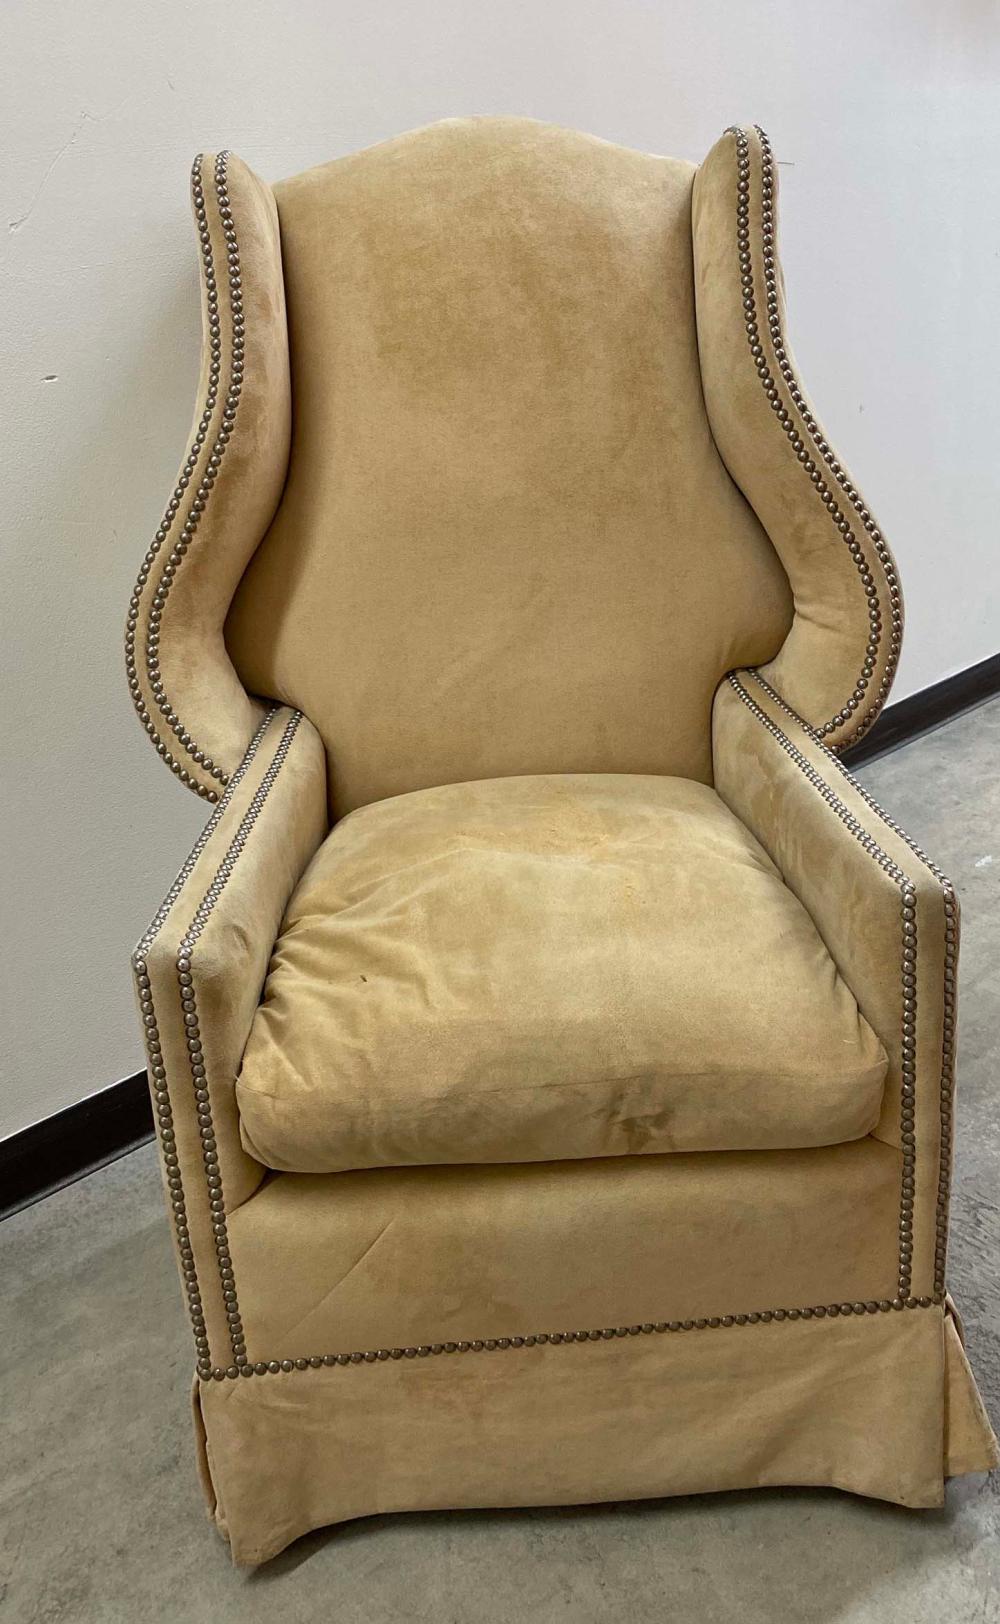 GEORGIAN STYLE SUEDE UPHOLSTERED 353aed